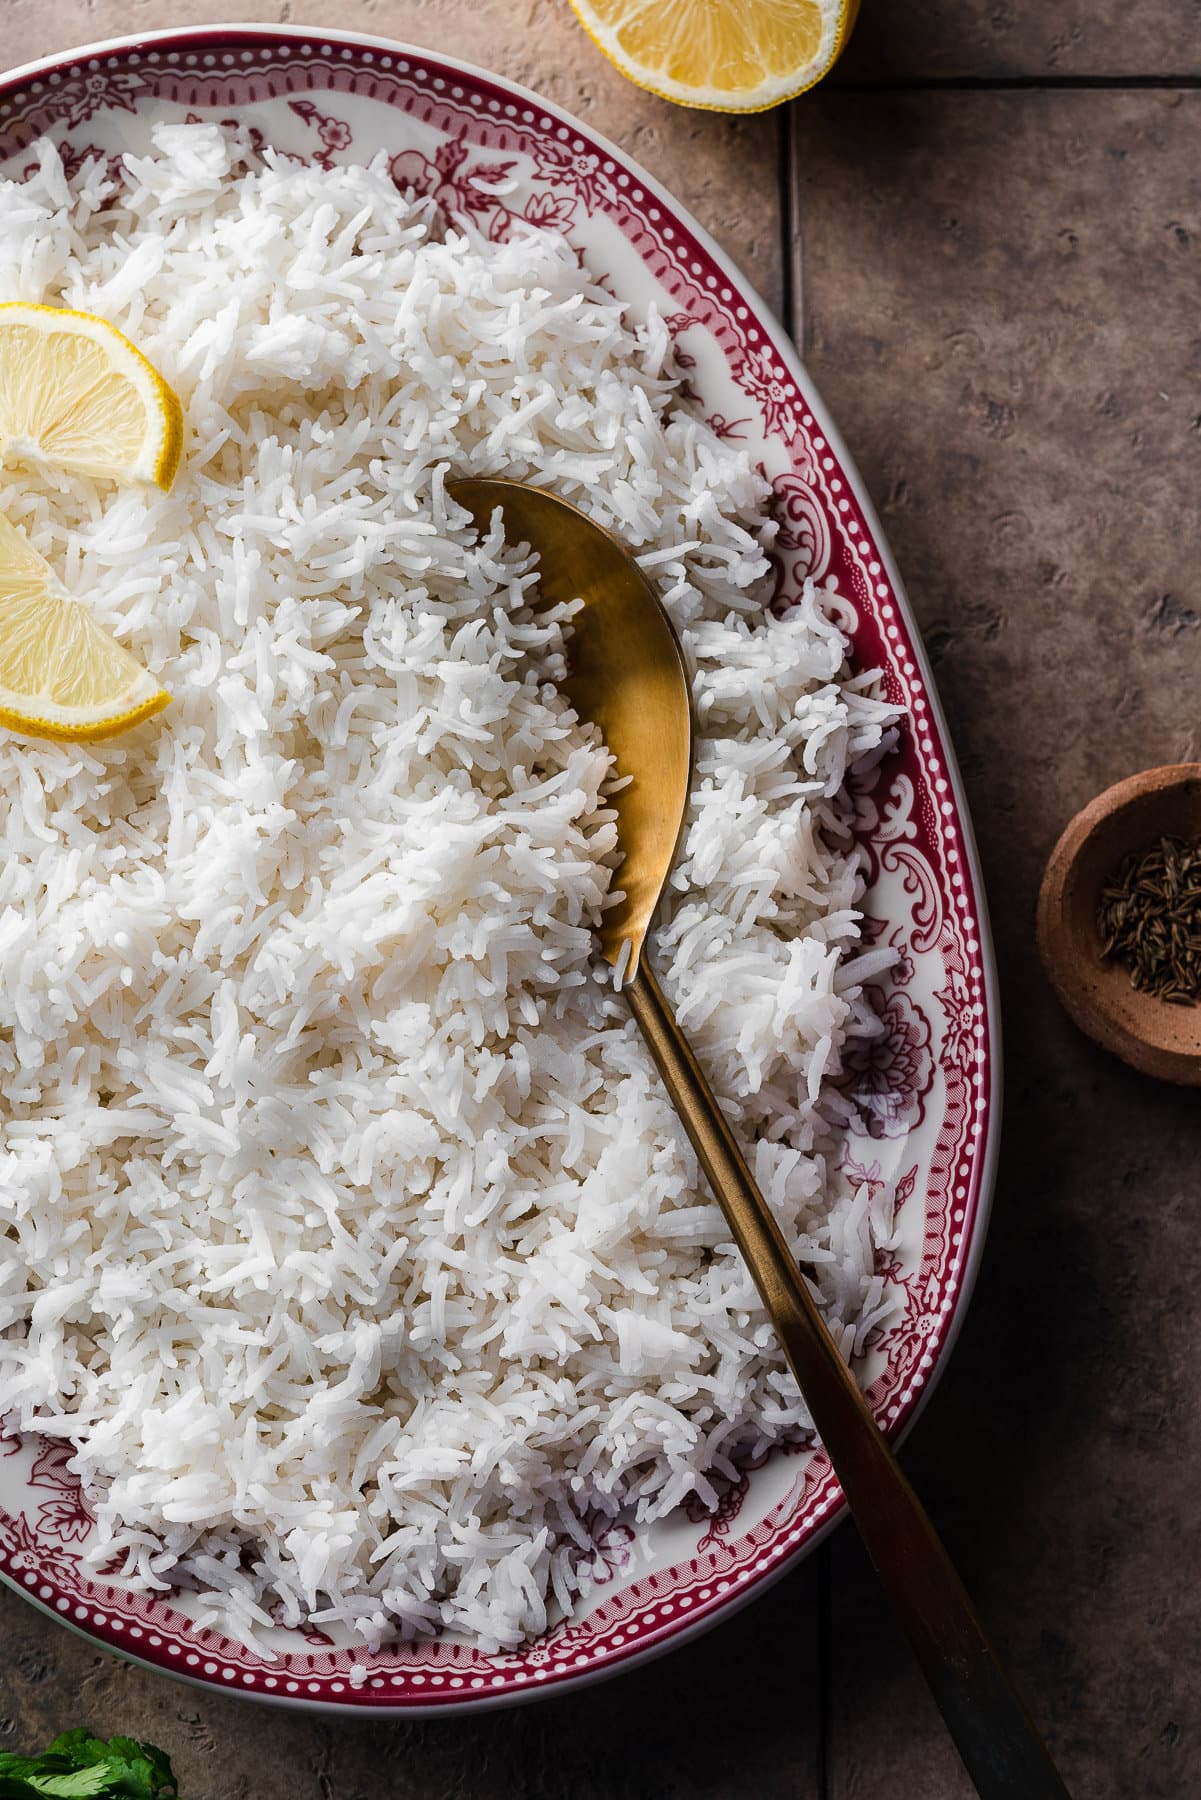 basmati rice in a decorative serving platter with lemon slices and a gold serving spoon with cumin seeds.